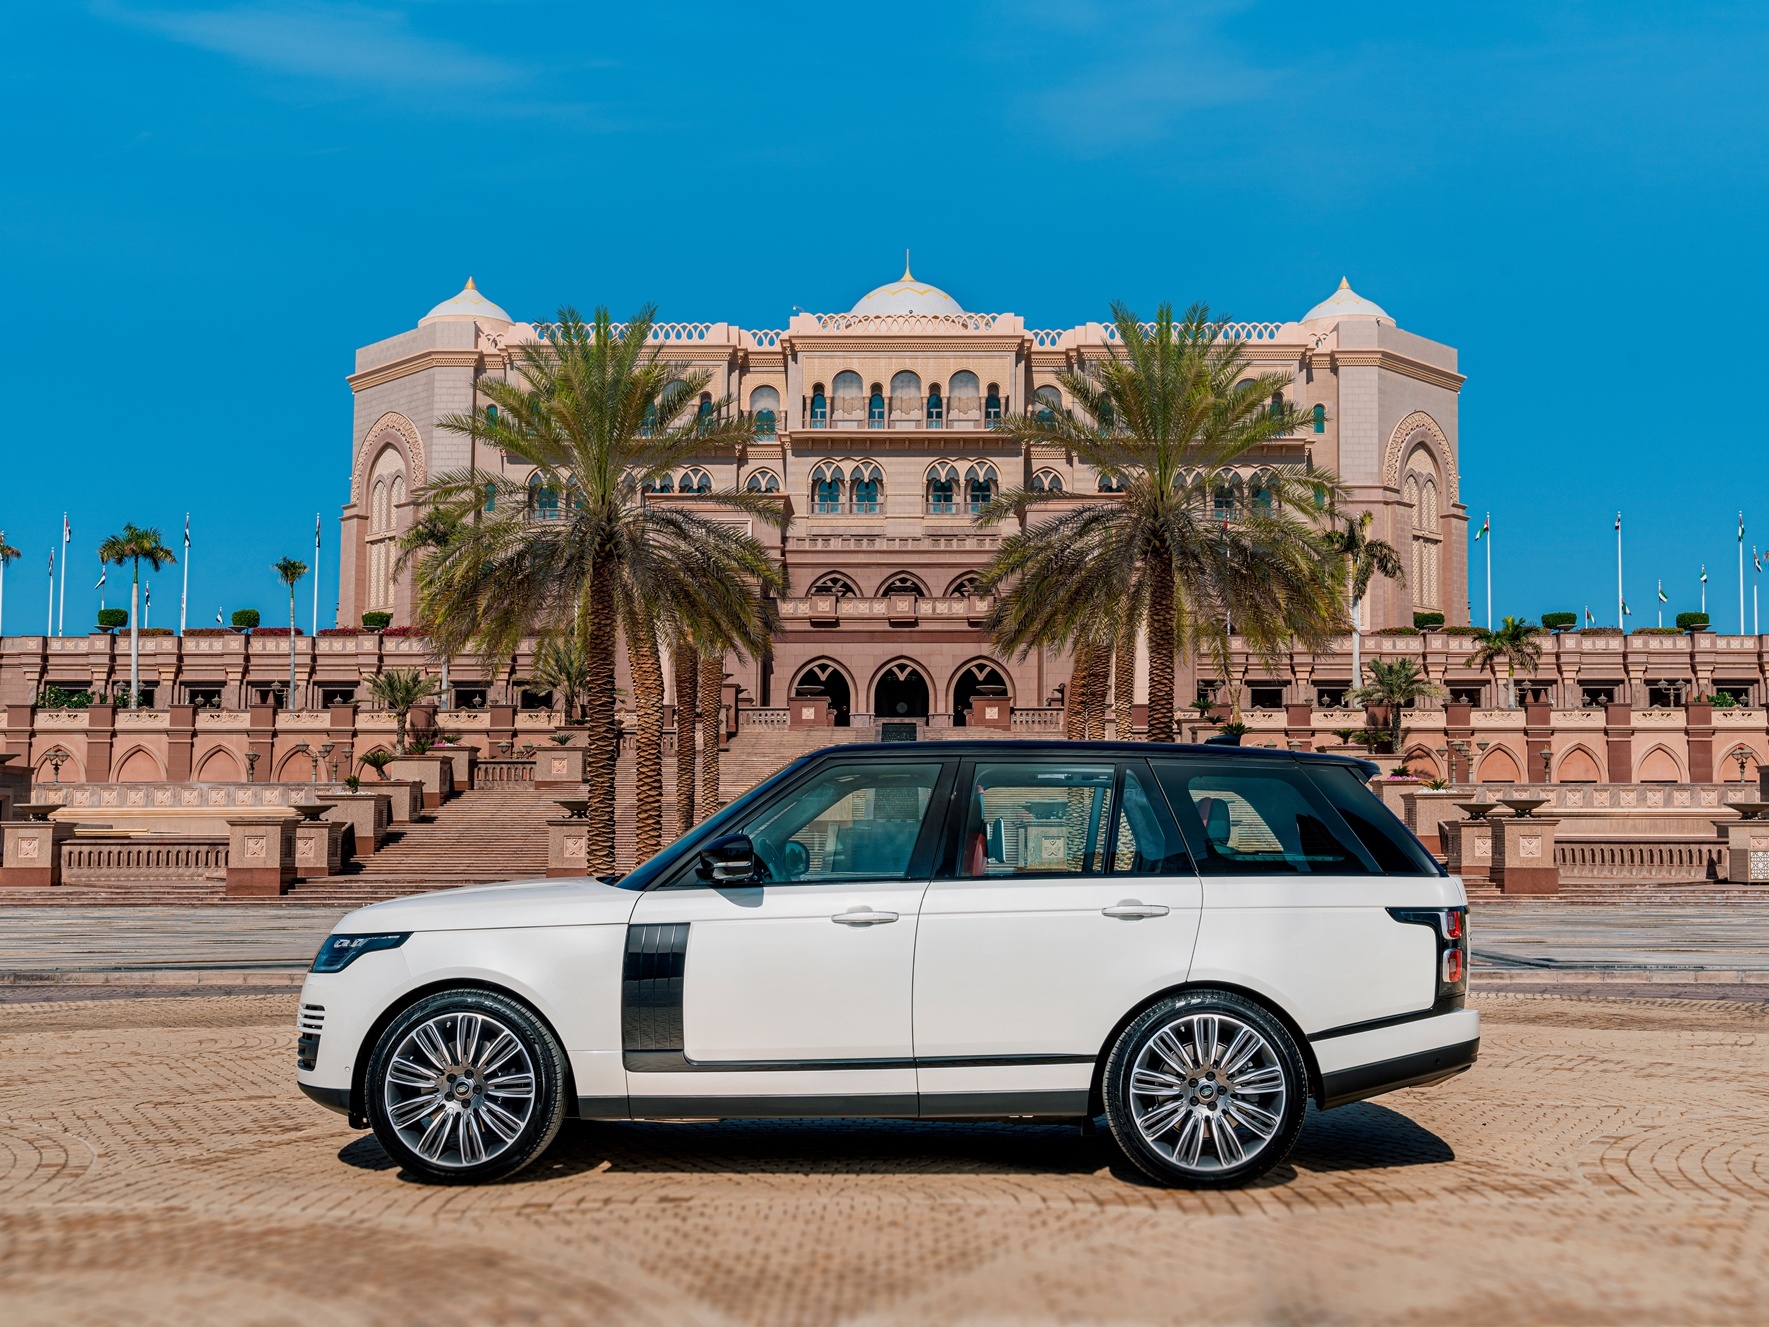 Special Edition 2021 Range Rover Vogue Vehicles celebrating 50 Years of the Union arrive in UAE & Parts News